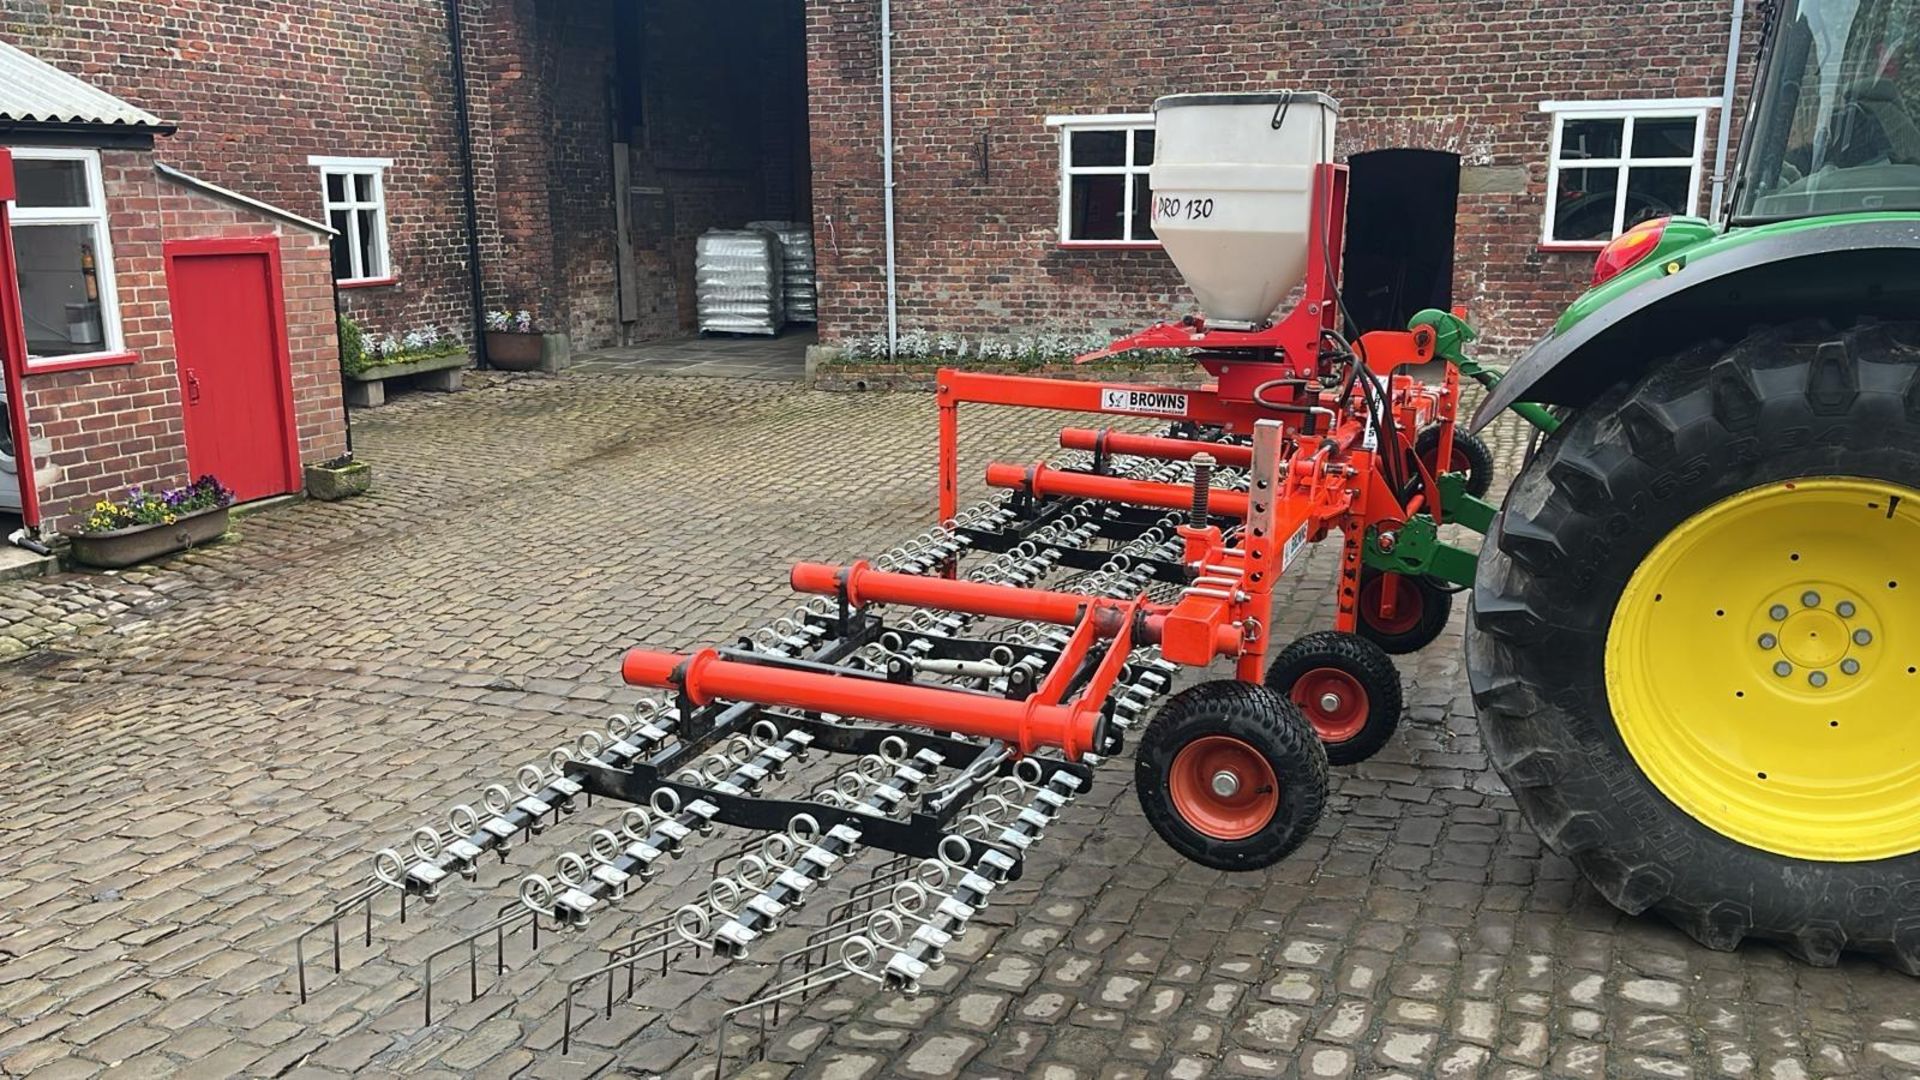 BROWNS GRASSMASTER SPRING TINE GRASS HARROWS WITH STOCKS FAN JET PRO 130 AIR SEEDER SERIAL NUMBER - Image 2 of 11